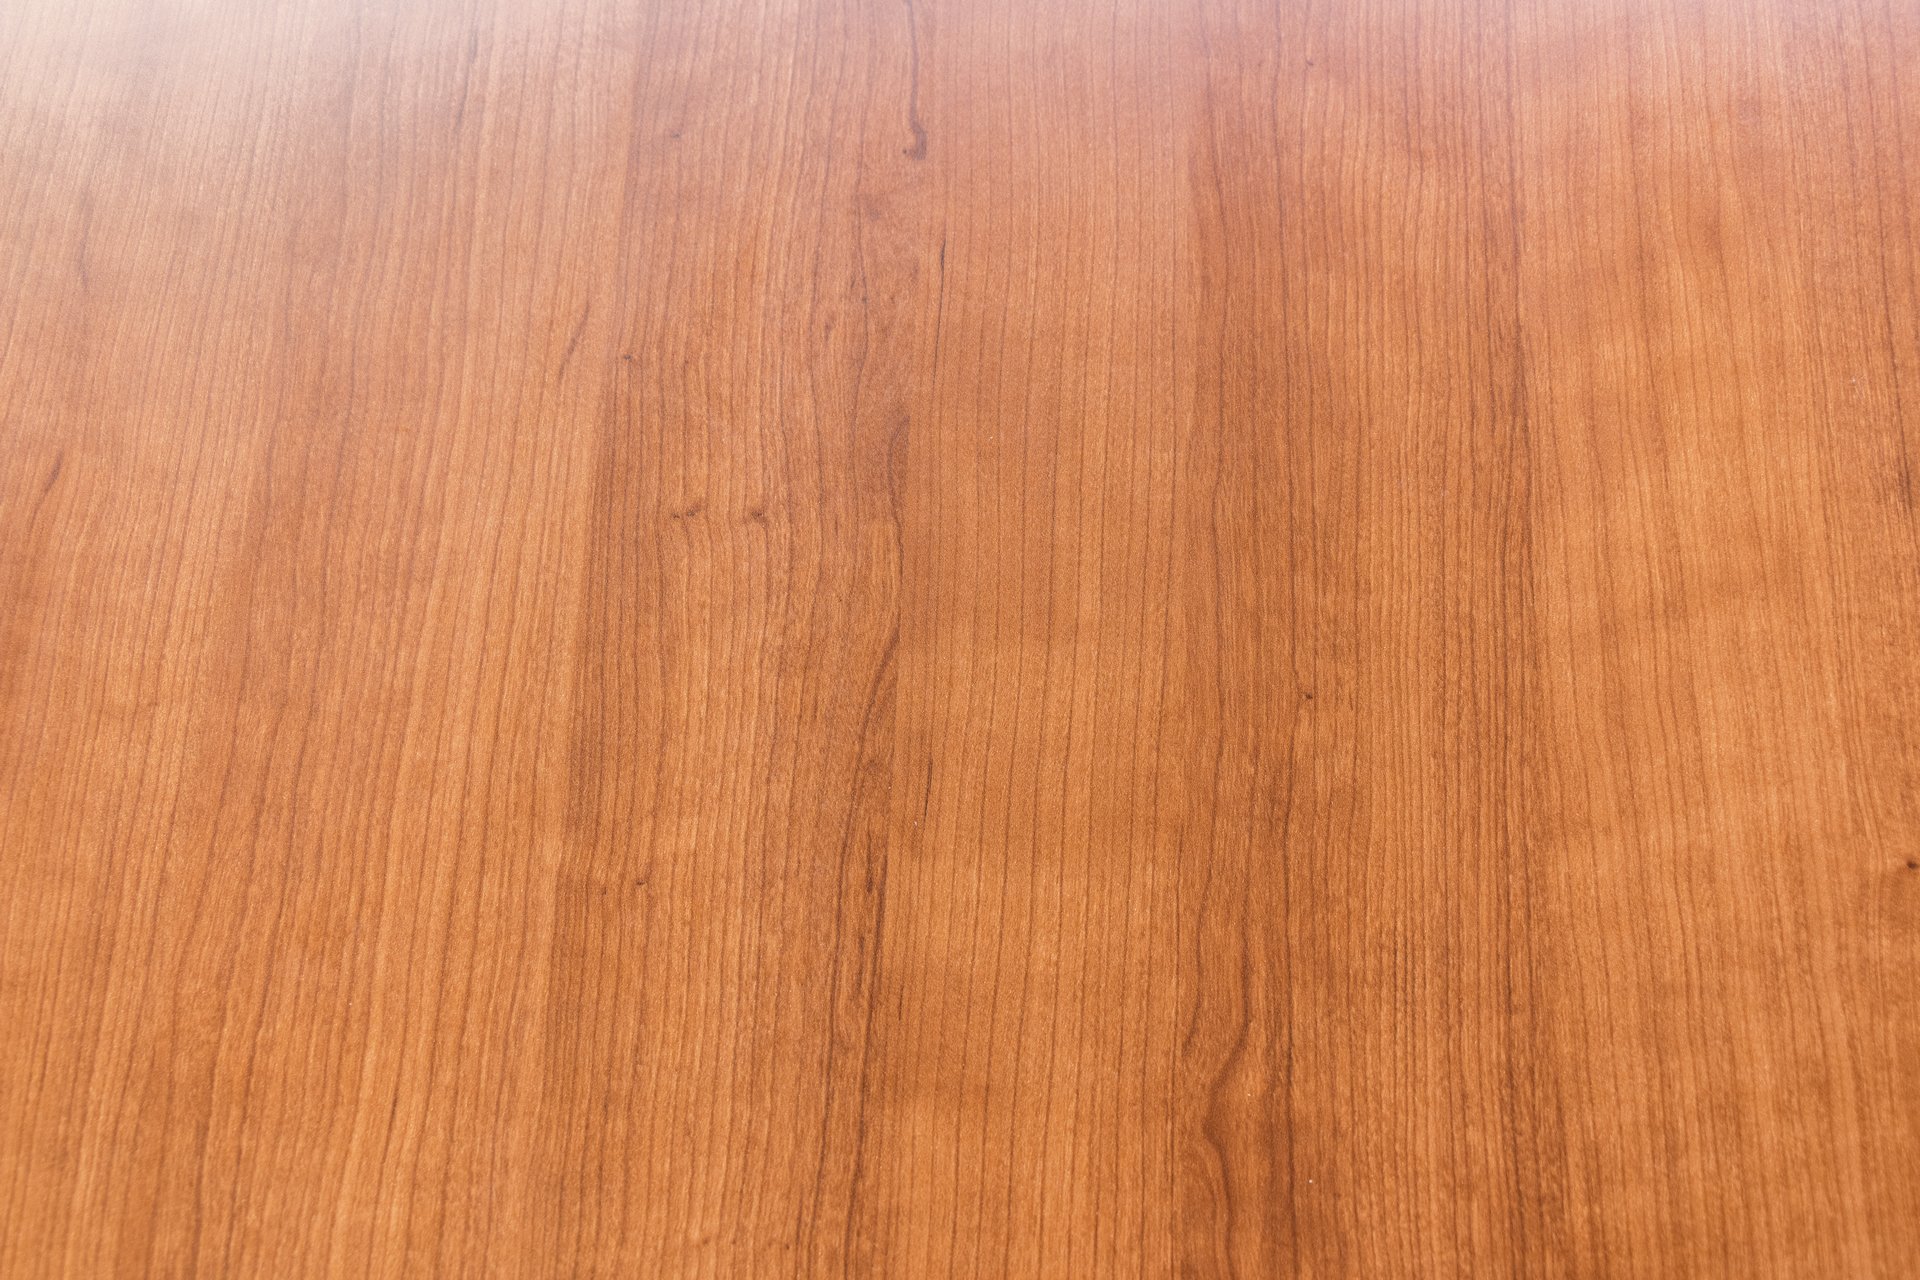 peartreeofficefurniture_peartreeofficefurniture_peartreeofficefurniture_nienkamper-vox-8-x-3-5-cherry-laminate-tapered-edge-conference-table-7.jpg